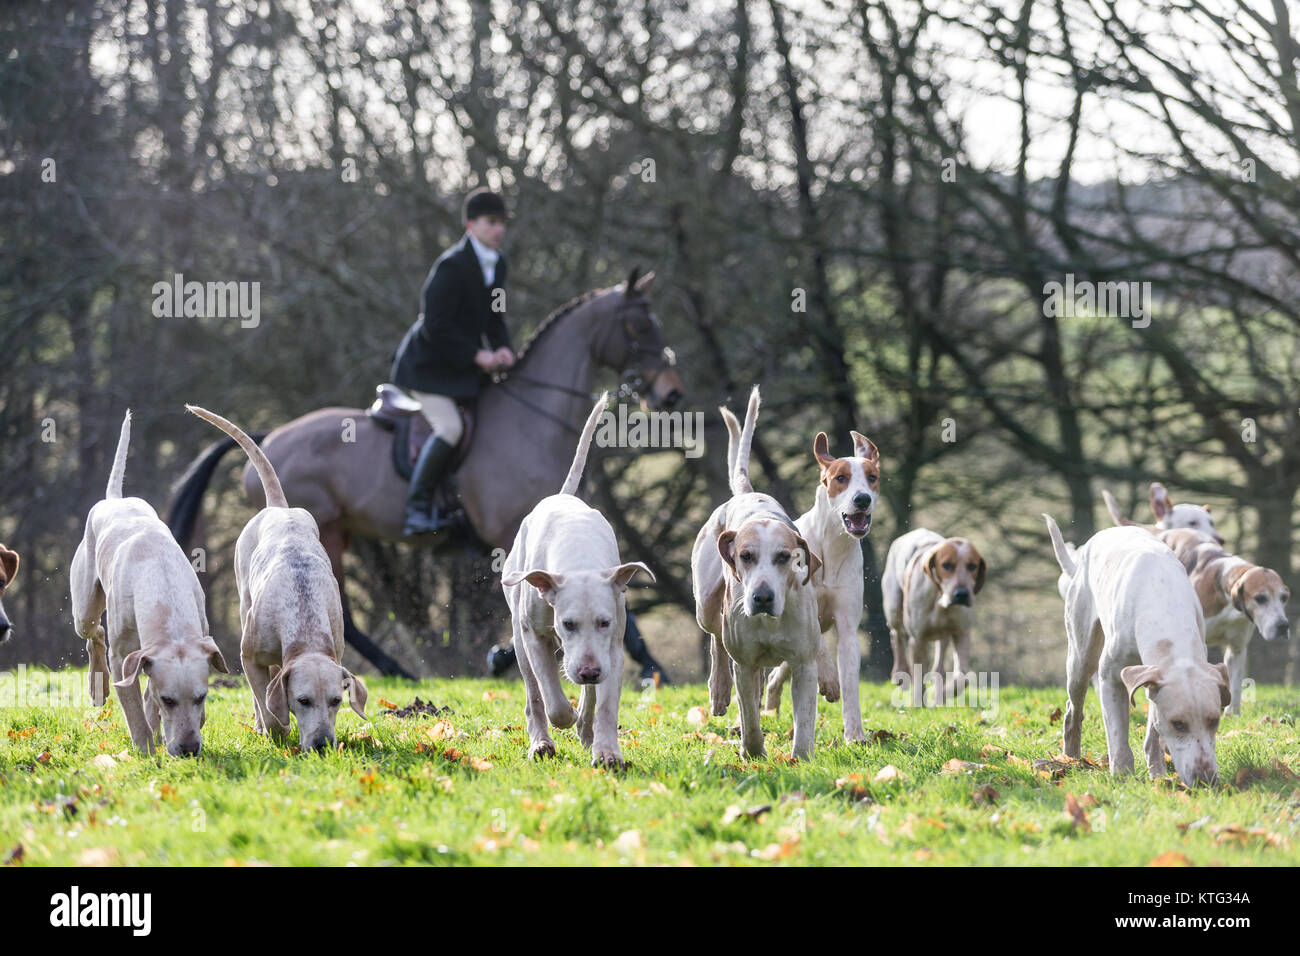 The Albrighton and Woodland Hunt at Hagley Hall, Worcestershire, Boxing Day Hunt 2017 Stock Photo